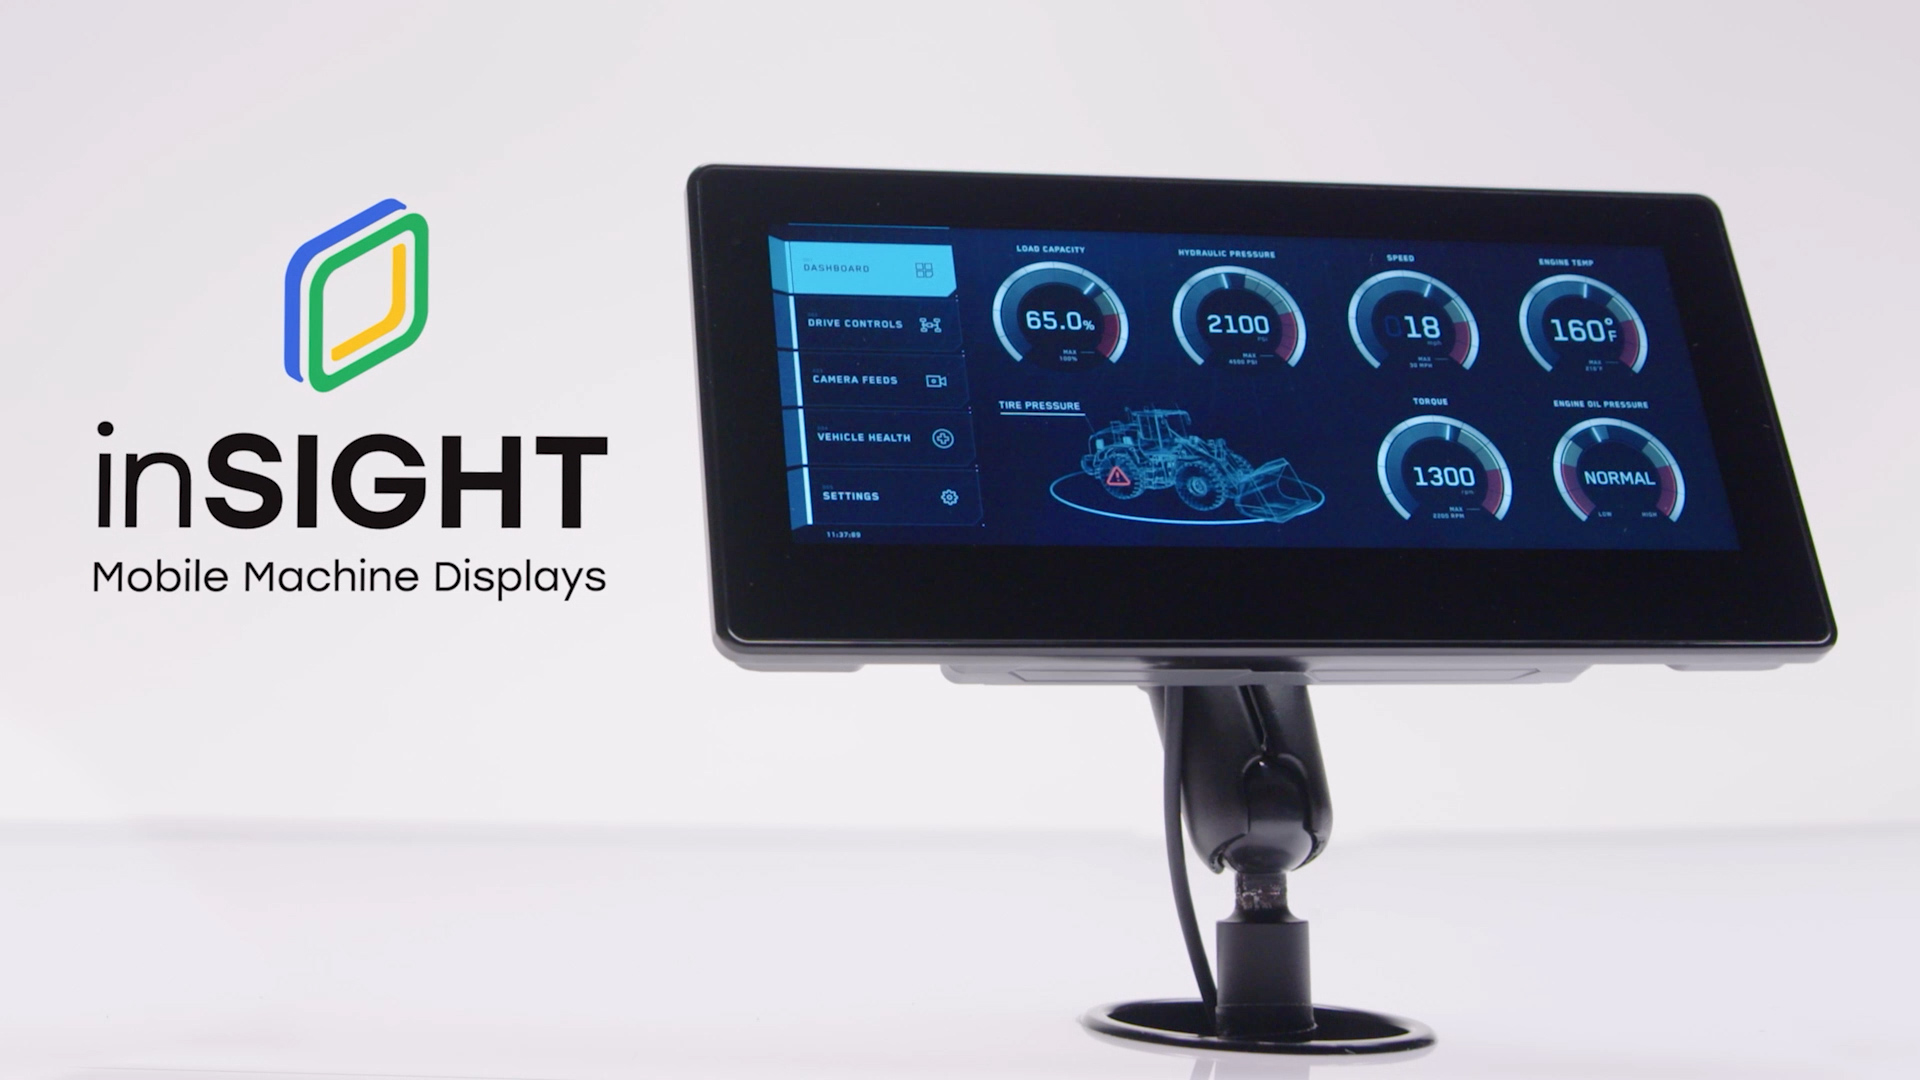 The inSIGHT S12 Mobile Machine Display